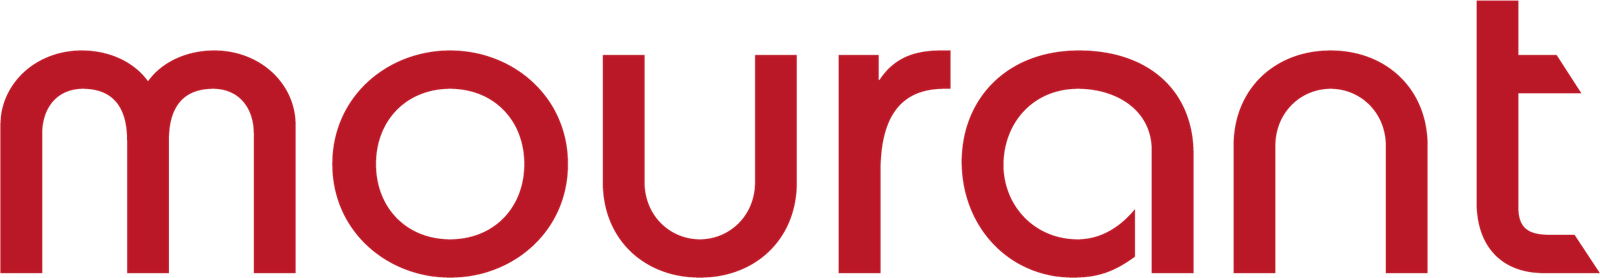 mourant-logo_online-rgb.png